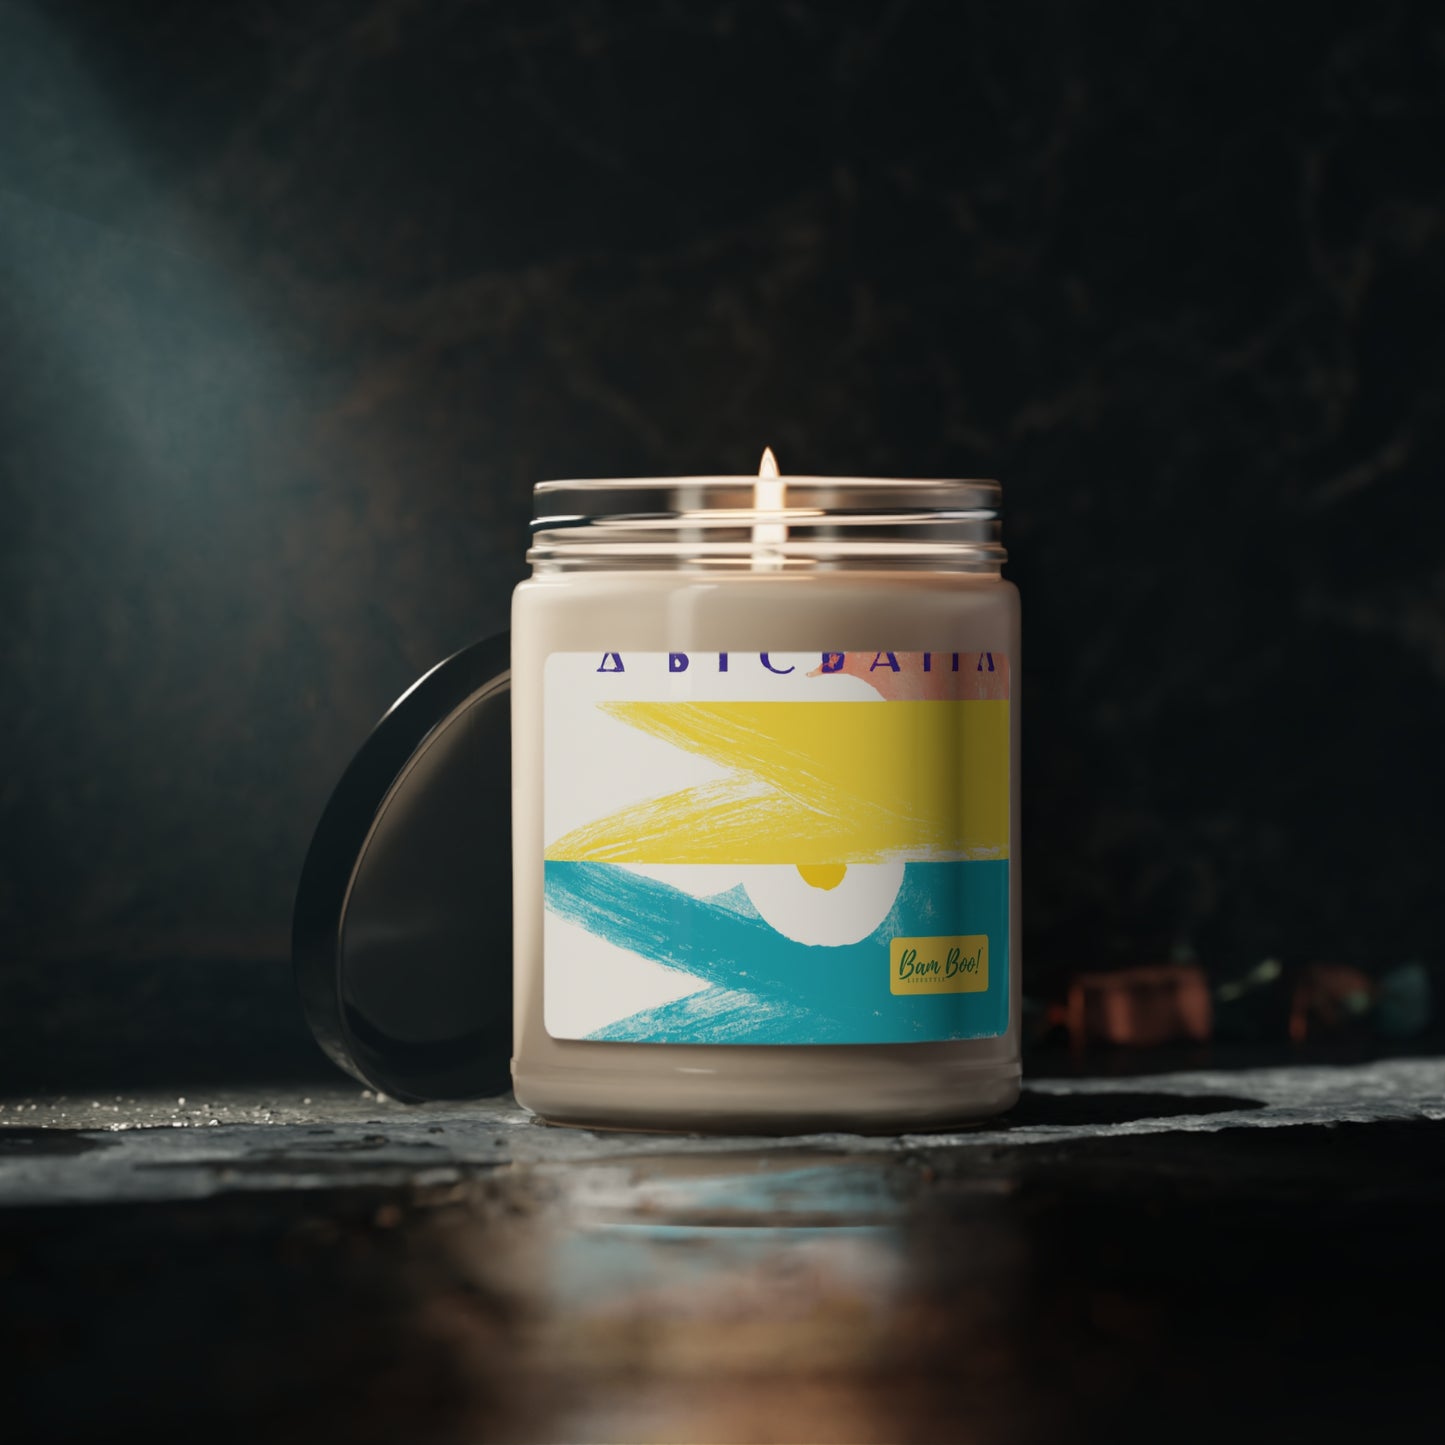 "3 Primary Colors, 1 Memory: A Colorful Reflection" - Bam Boo! Lifestyle Eco-friendly Soy Candle